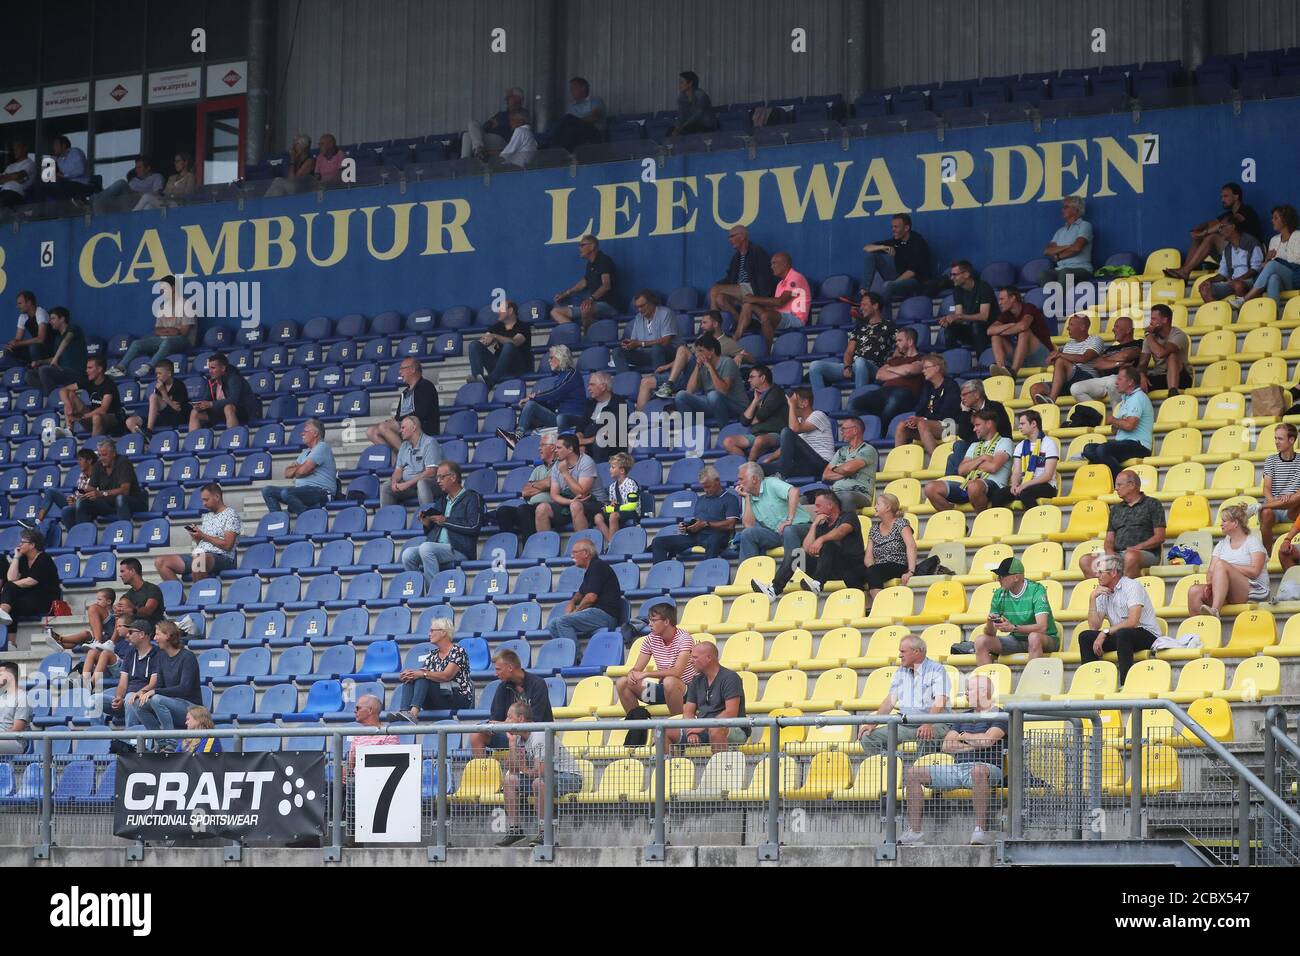 LEEUWARDEN, NETHERLANDS - AUGUST 1: 1, 5m between the spectators seen during the pre season match  SC Cambuur v PEC Zwolle on August 1, 2020 in Leeuwarden, The Netherlands. *** Local Caption *** 1, 5m between the spectators Stock Photo